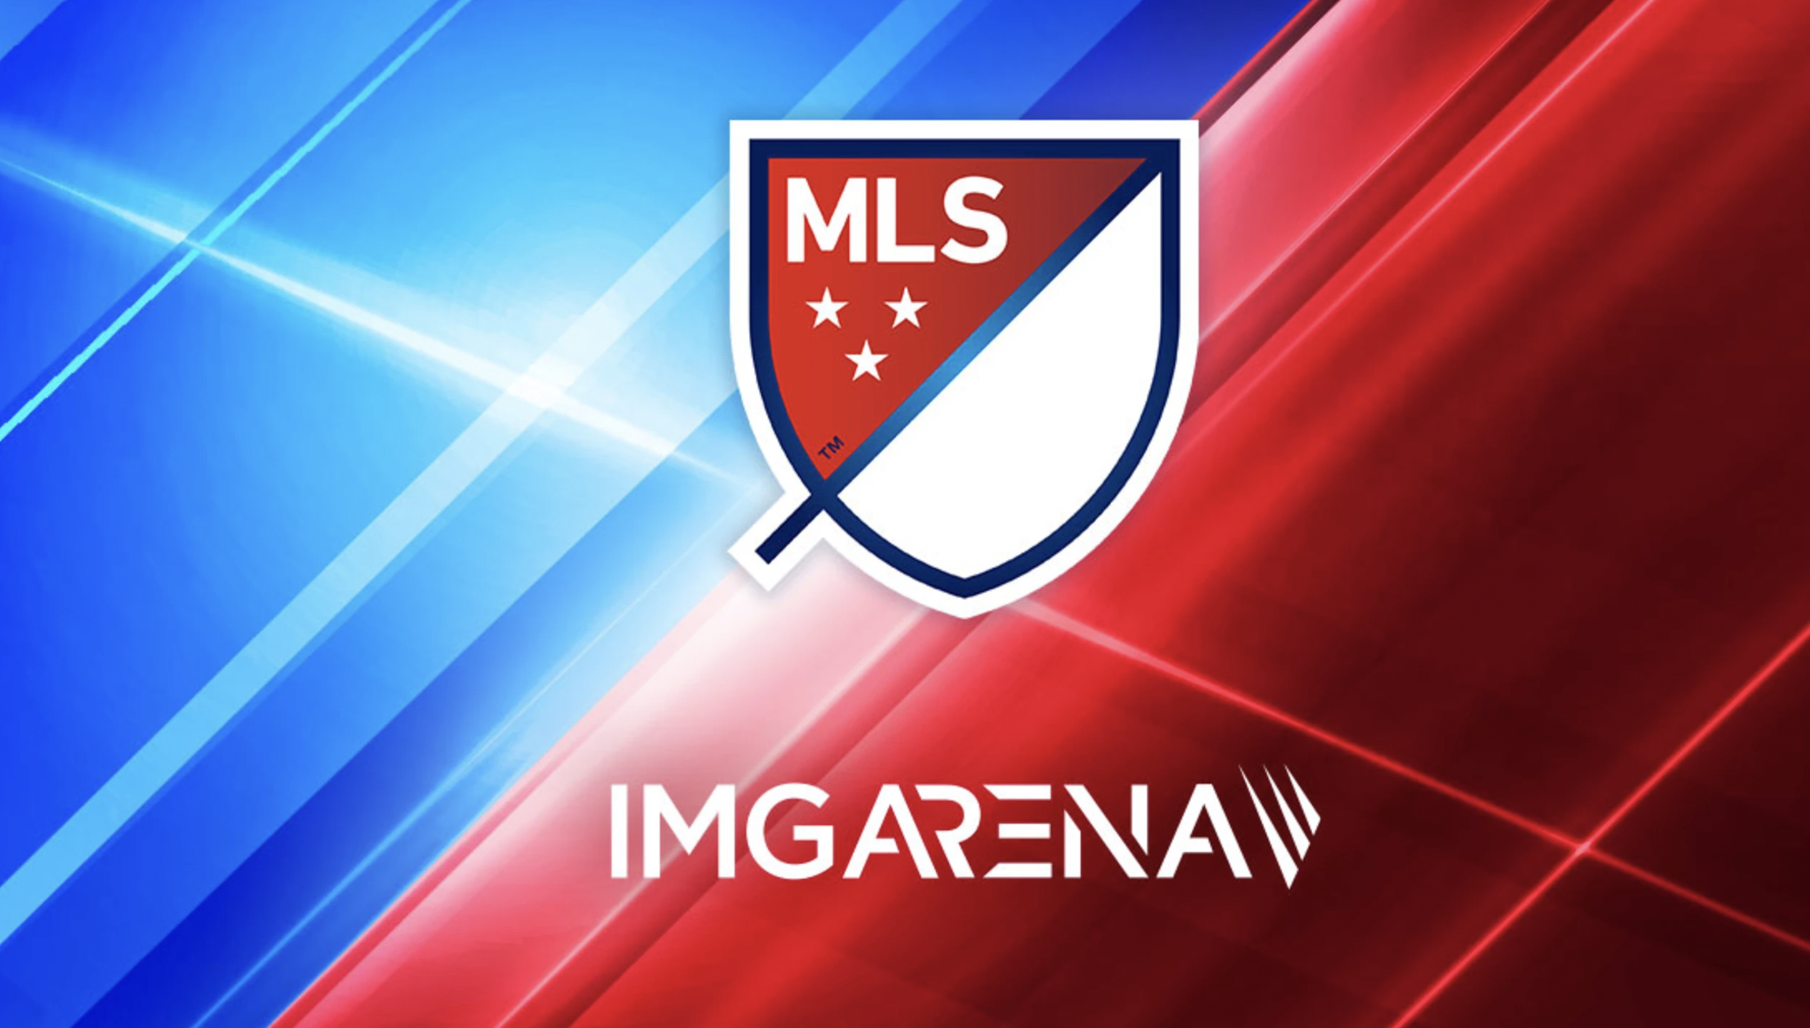 MLS appoints IMG Arena to create data-driven content to sell to booming betting business